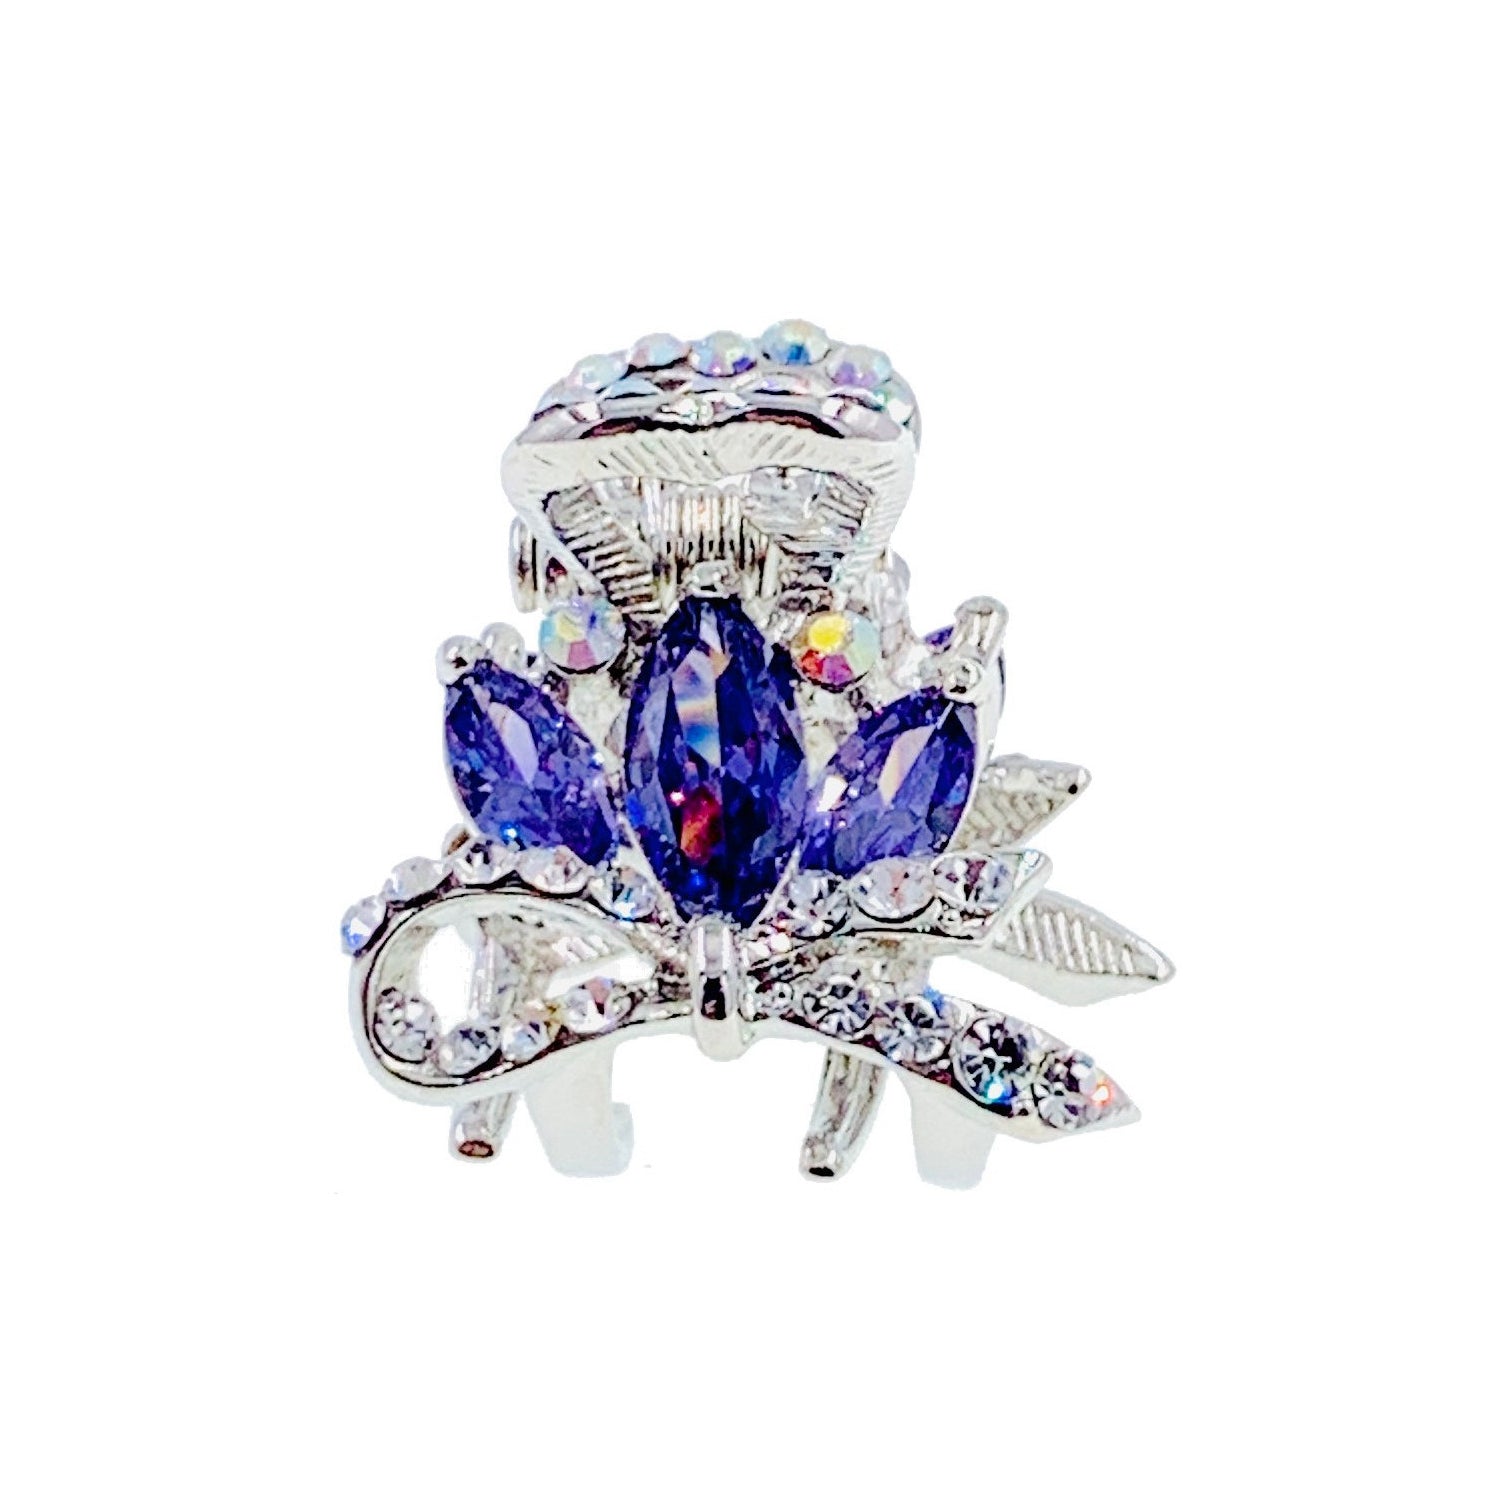 Amorette Flower Hair Claw Jaw Clip Cubic Zirconia CZ Crystal silver base clear blue purple pink amber, Hair Claw - MOGHANT